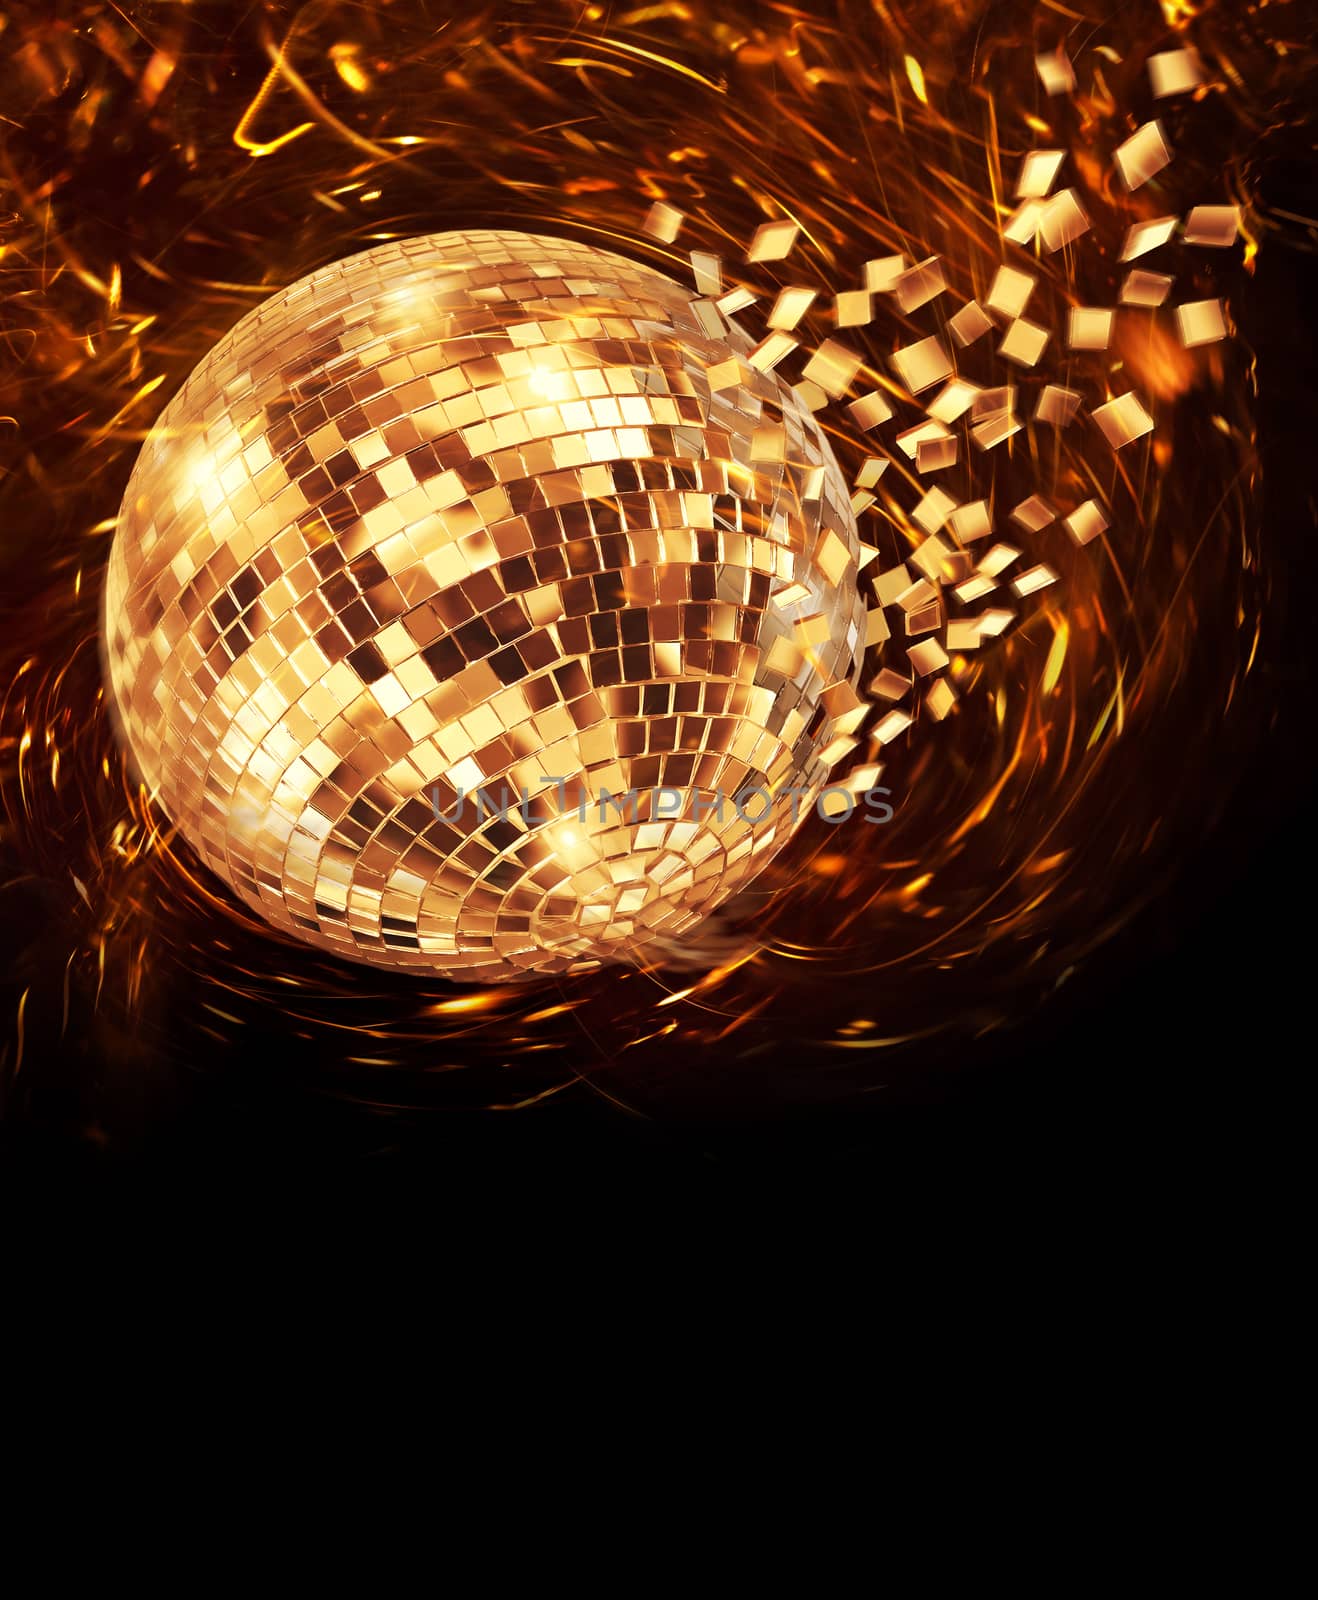 Vintage disco mirror ball spinning and breaking into golden flying glass pixel fragments on dark background